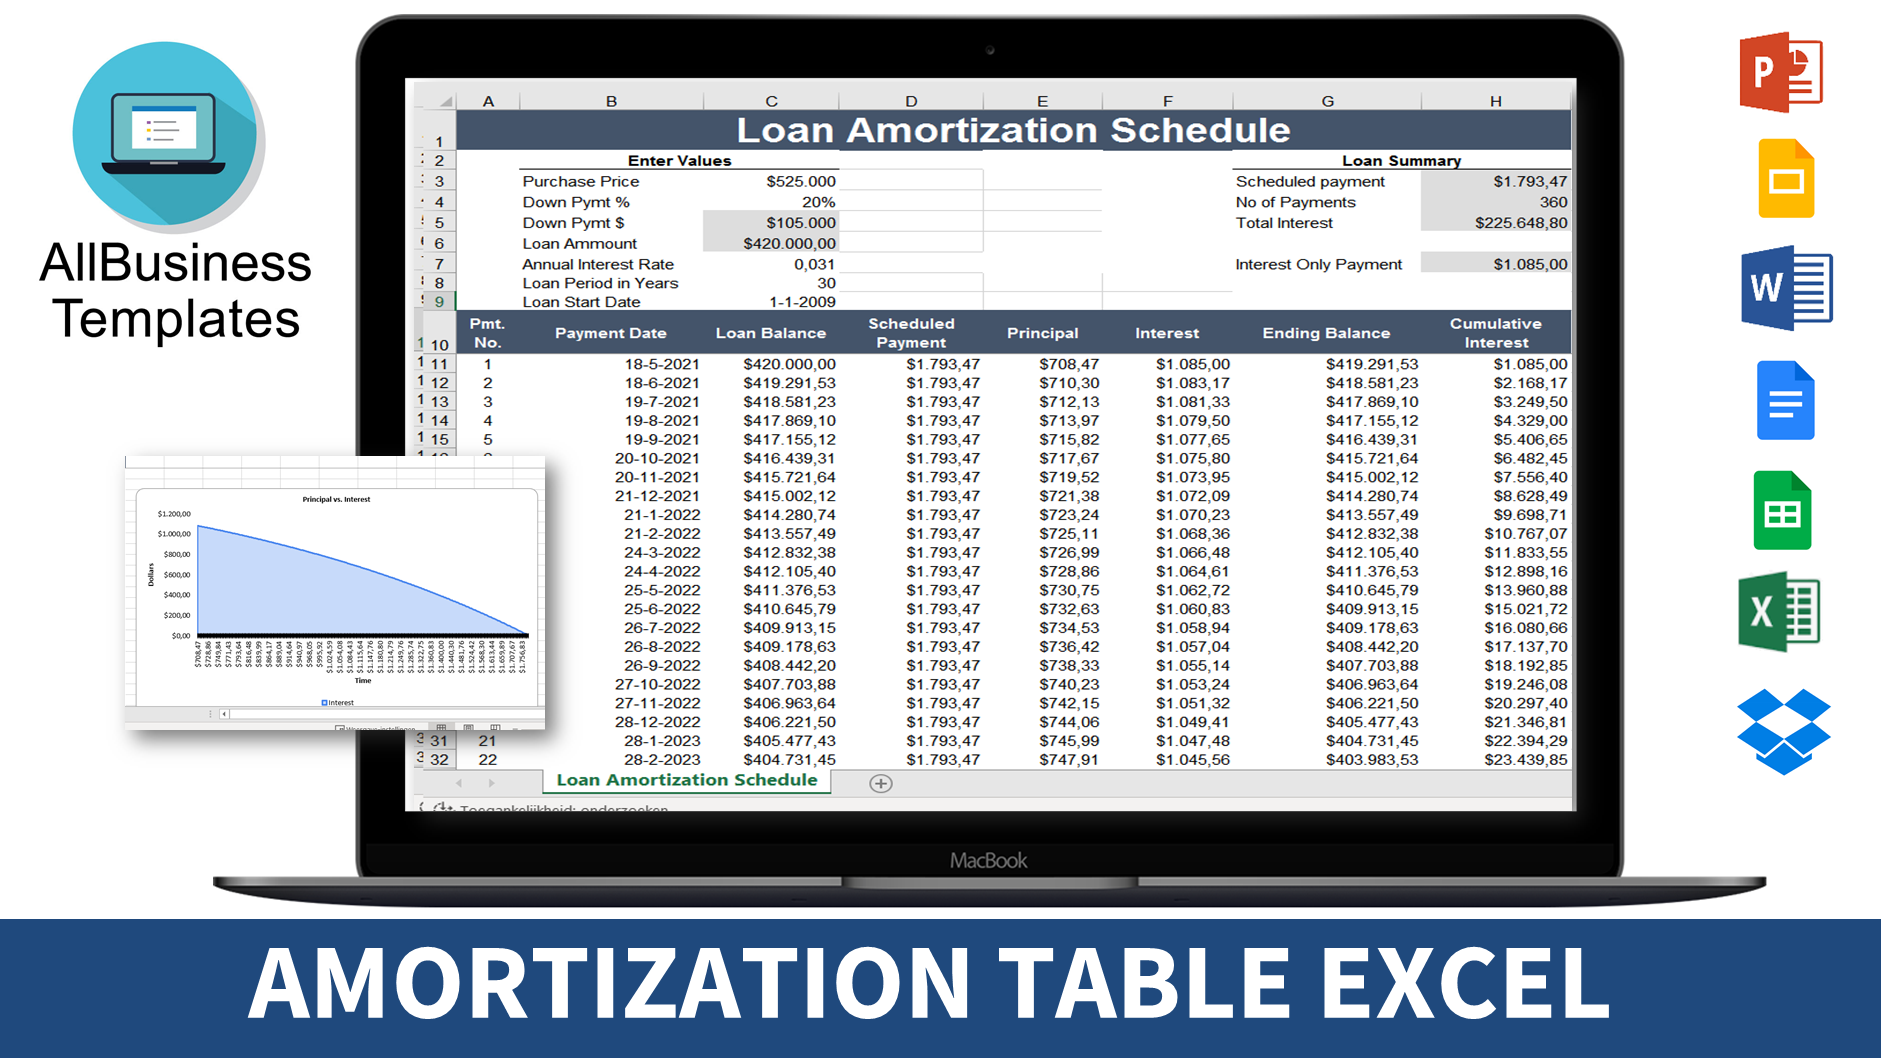 Amortization Table Excel main image